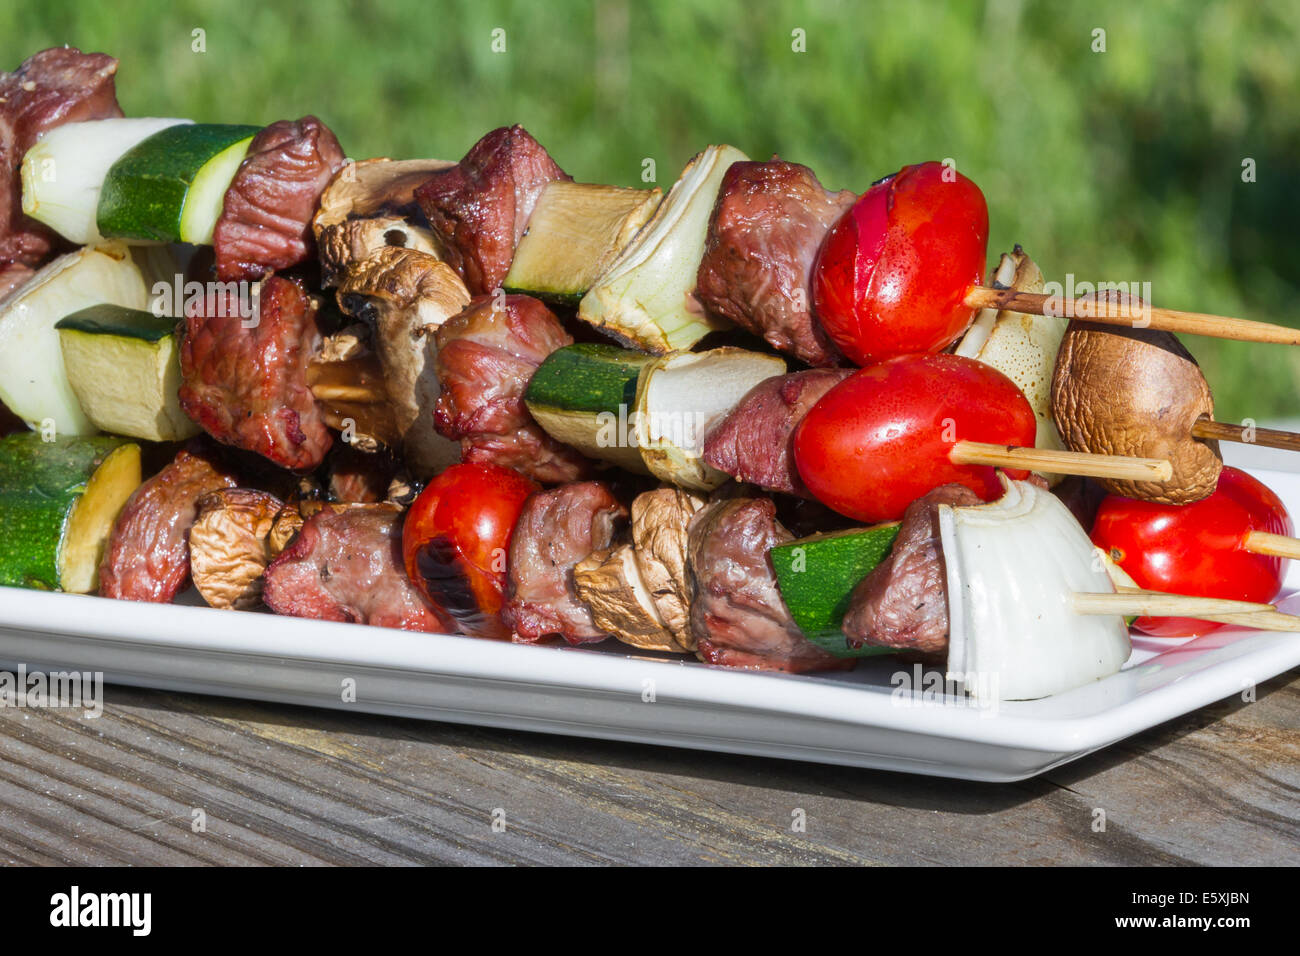 meat and vegetable skewers on a plate with seasonings for an outdoor meal Stock Photo